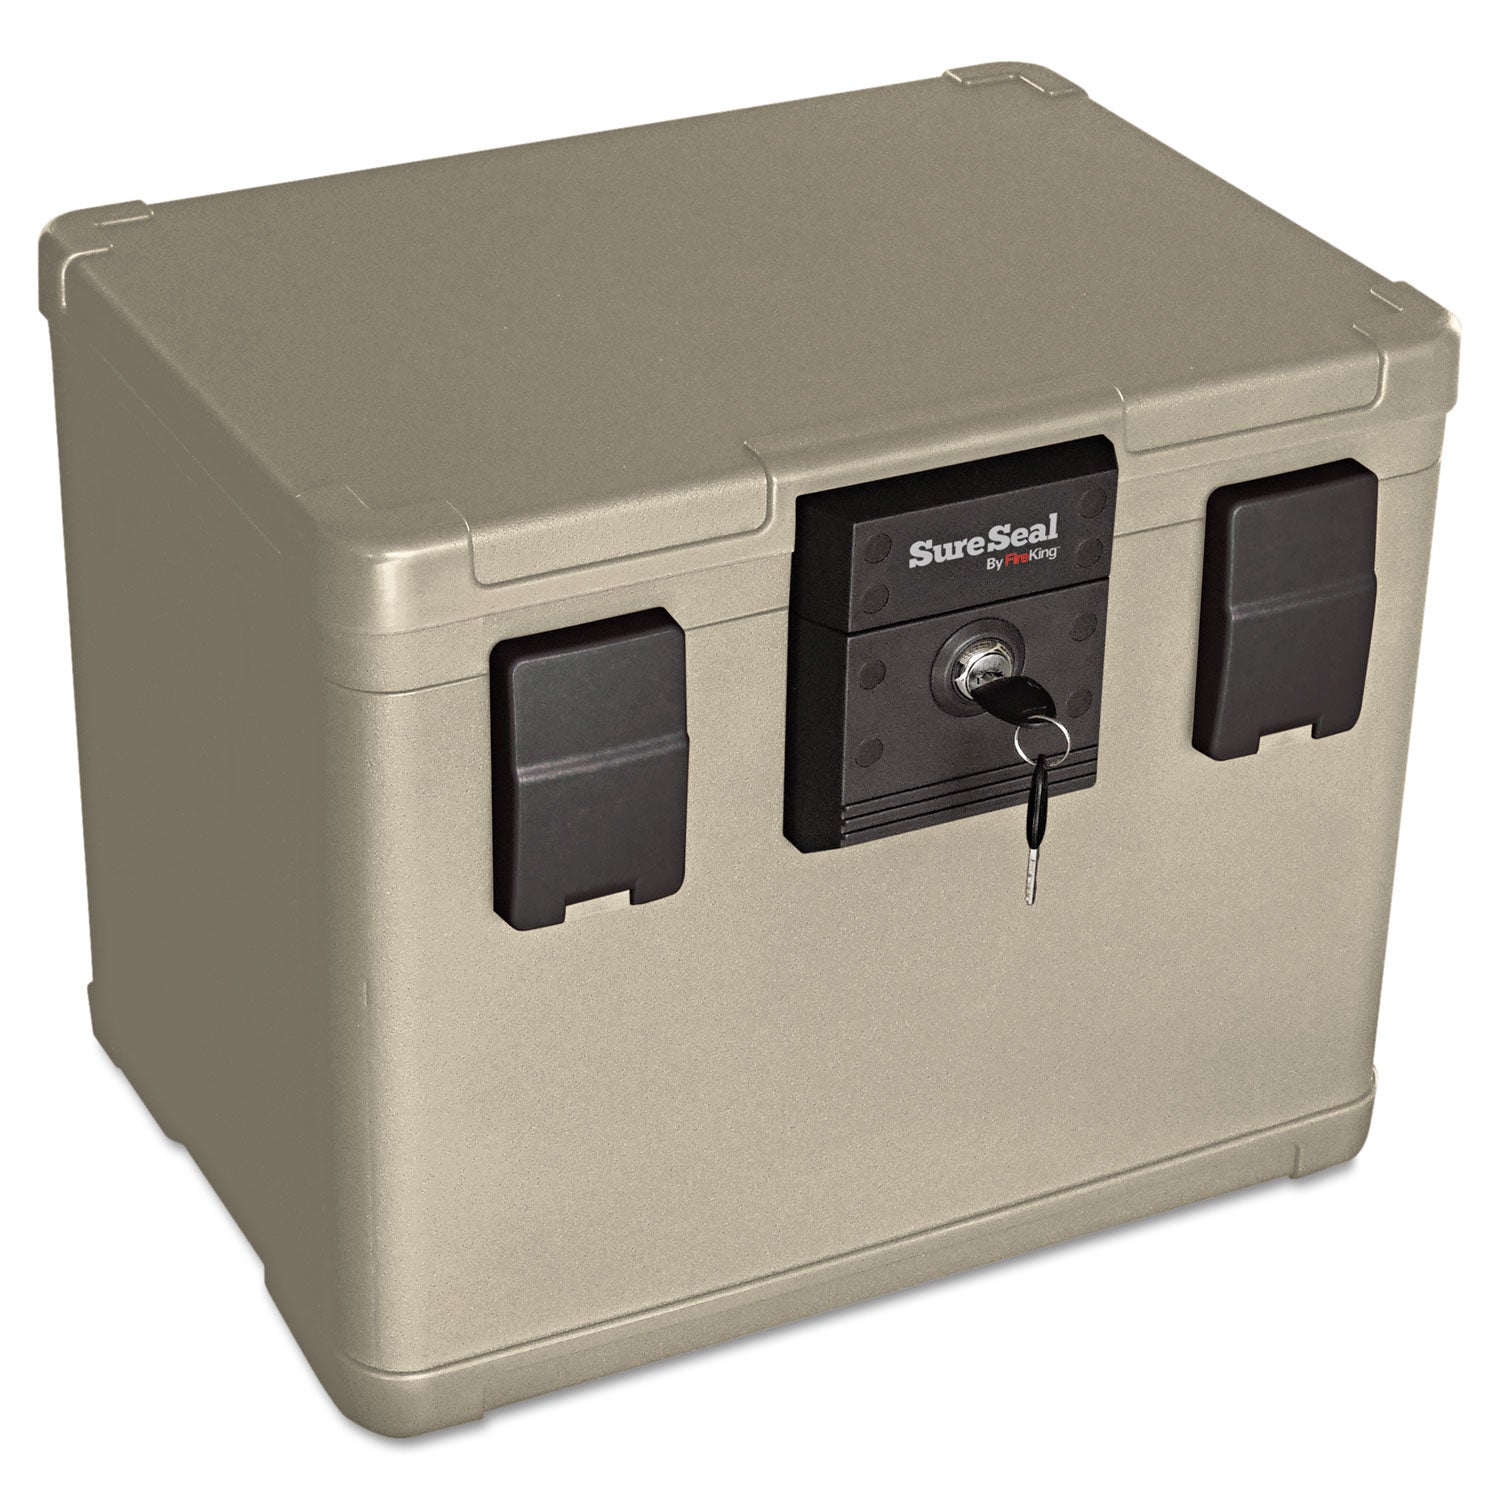 Fire and Waterproof Chest, 0.6 cu ft, 16w x 12.5d x 13h, Taupe - 